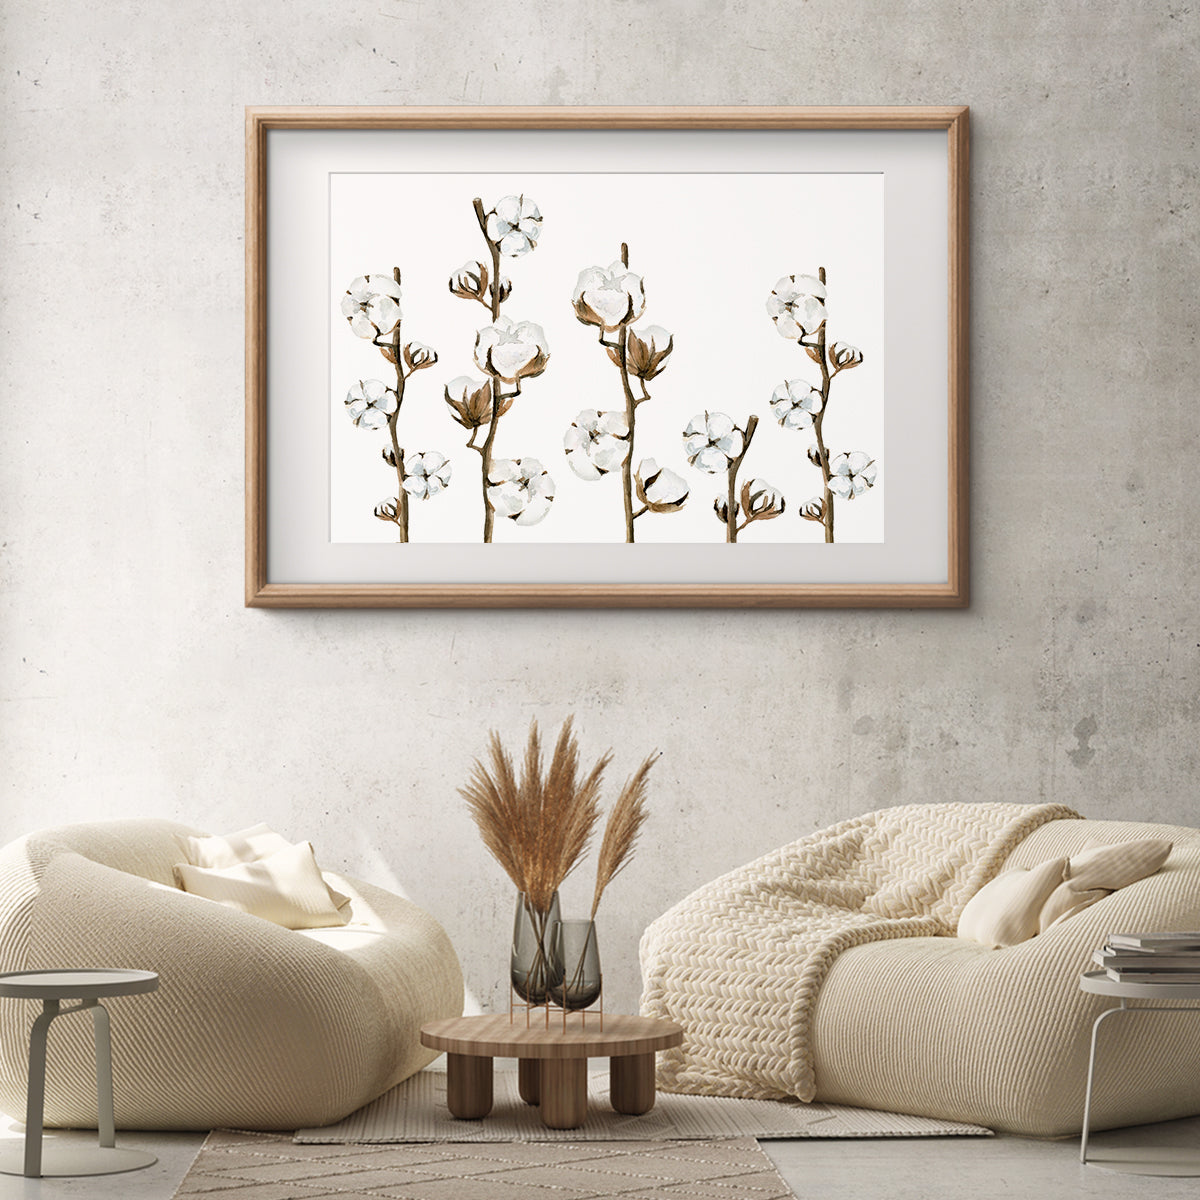 Cotton Branches Posters For Home Decor-Horizontal Posters NOT FRAMED-CetArt-10″x8″ inches-CetArt